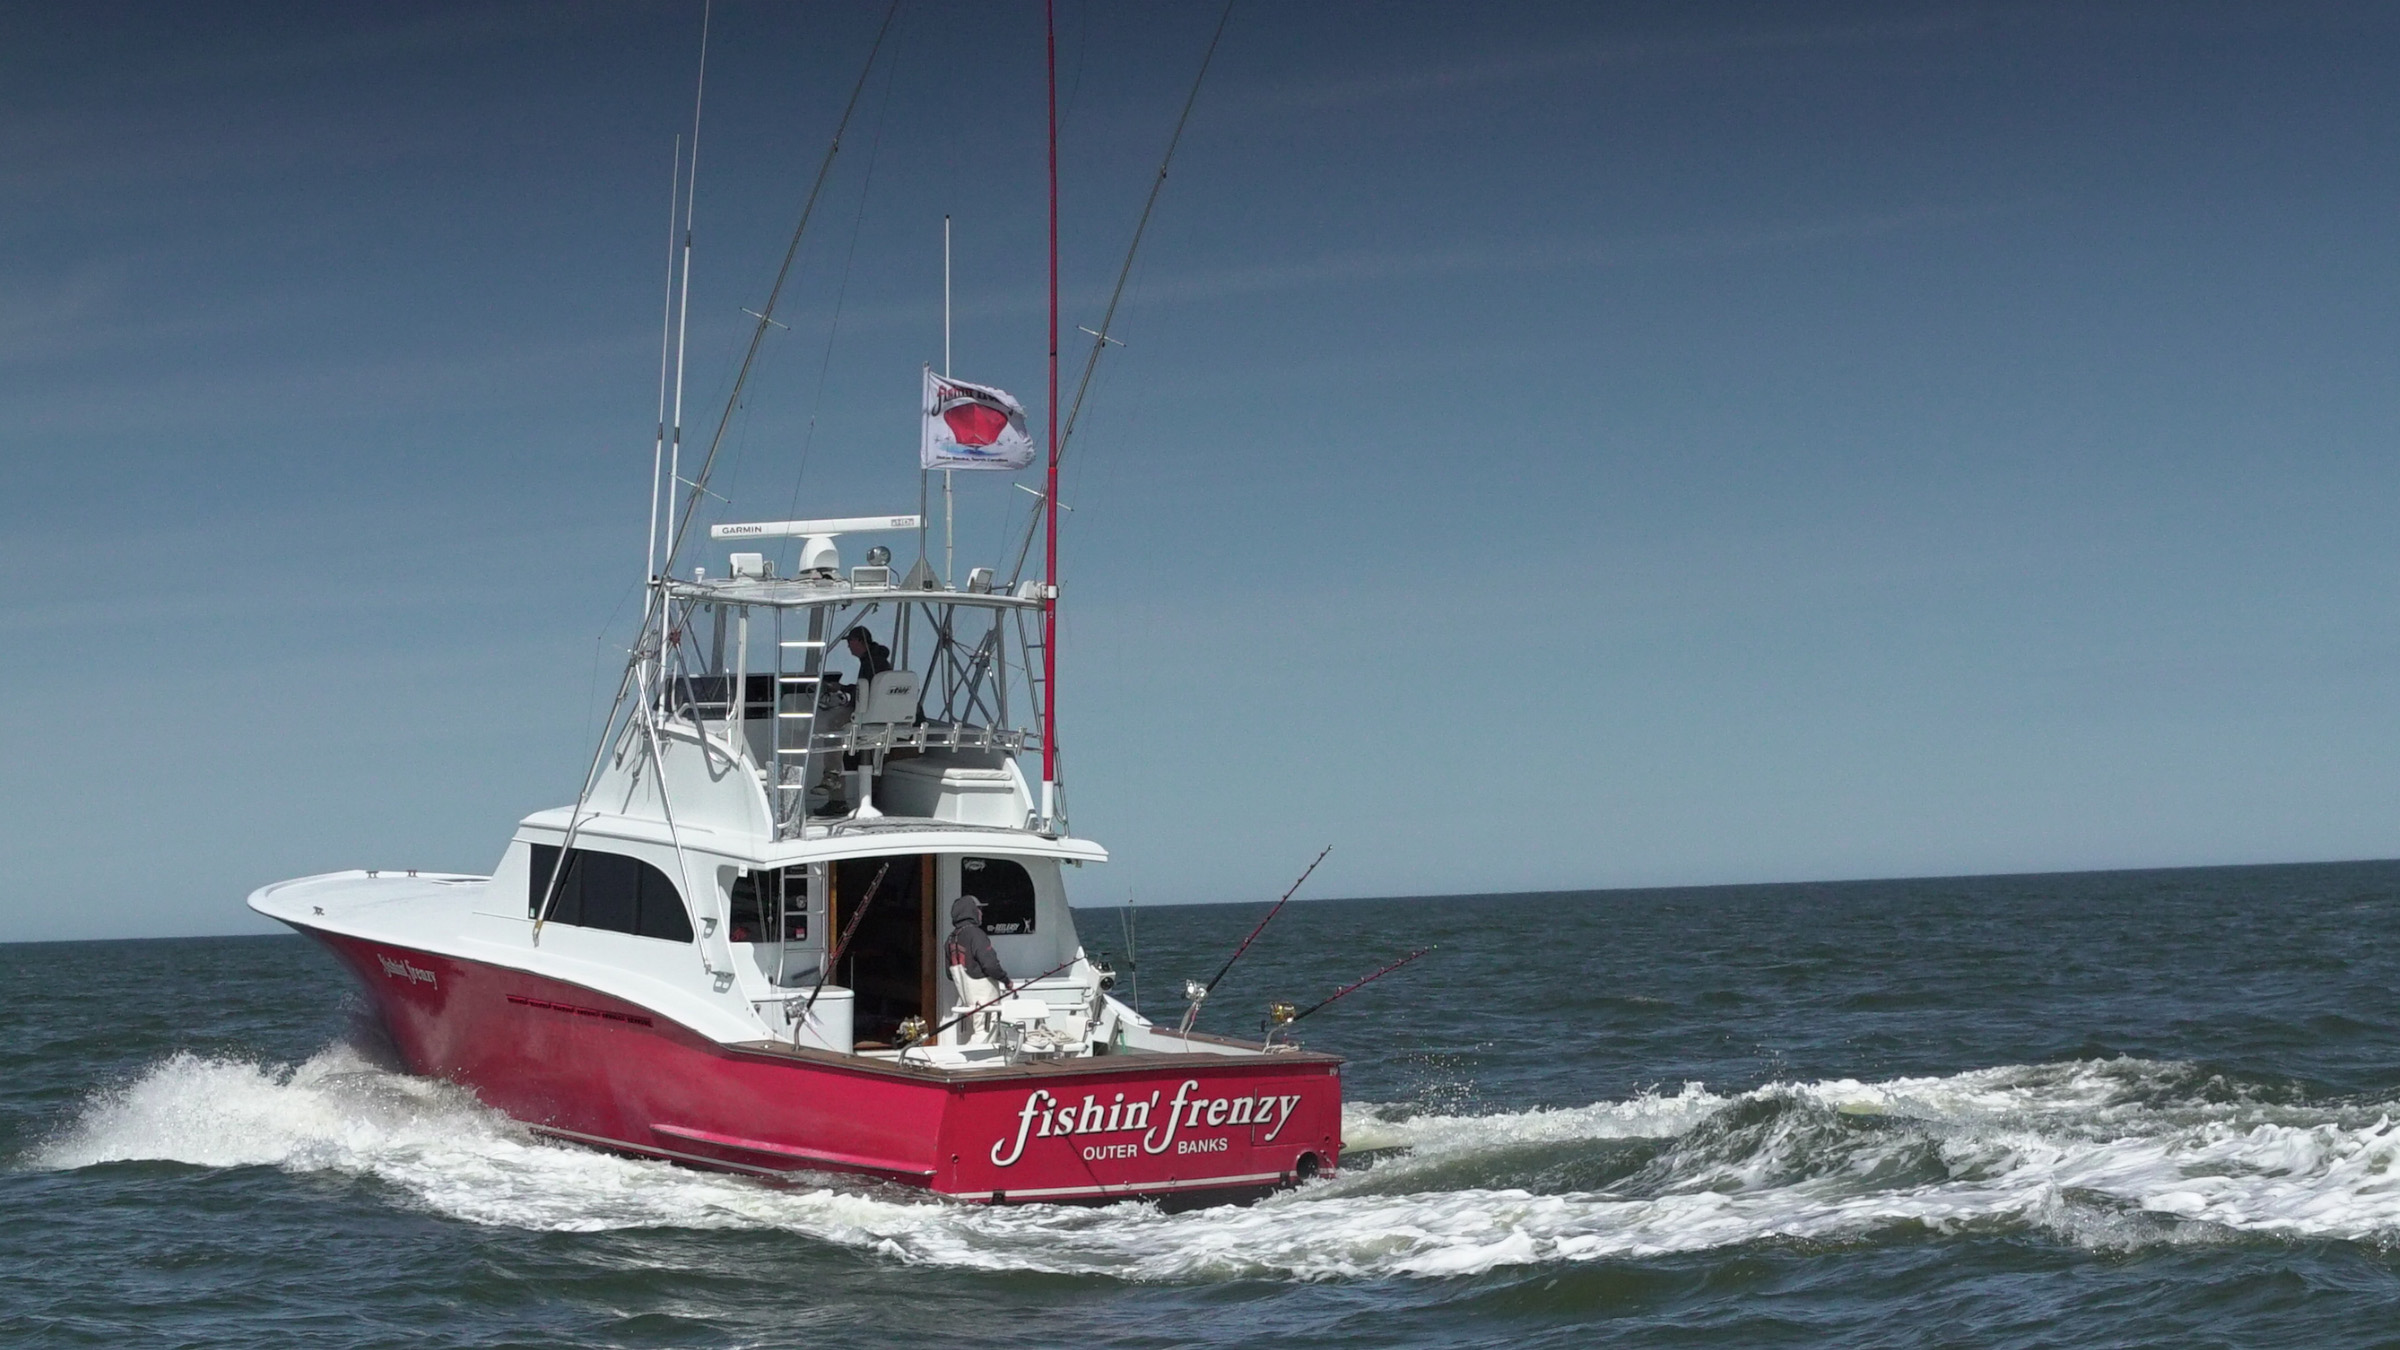 Wicked Tuna: North Vs South - National Geographic for everyone in